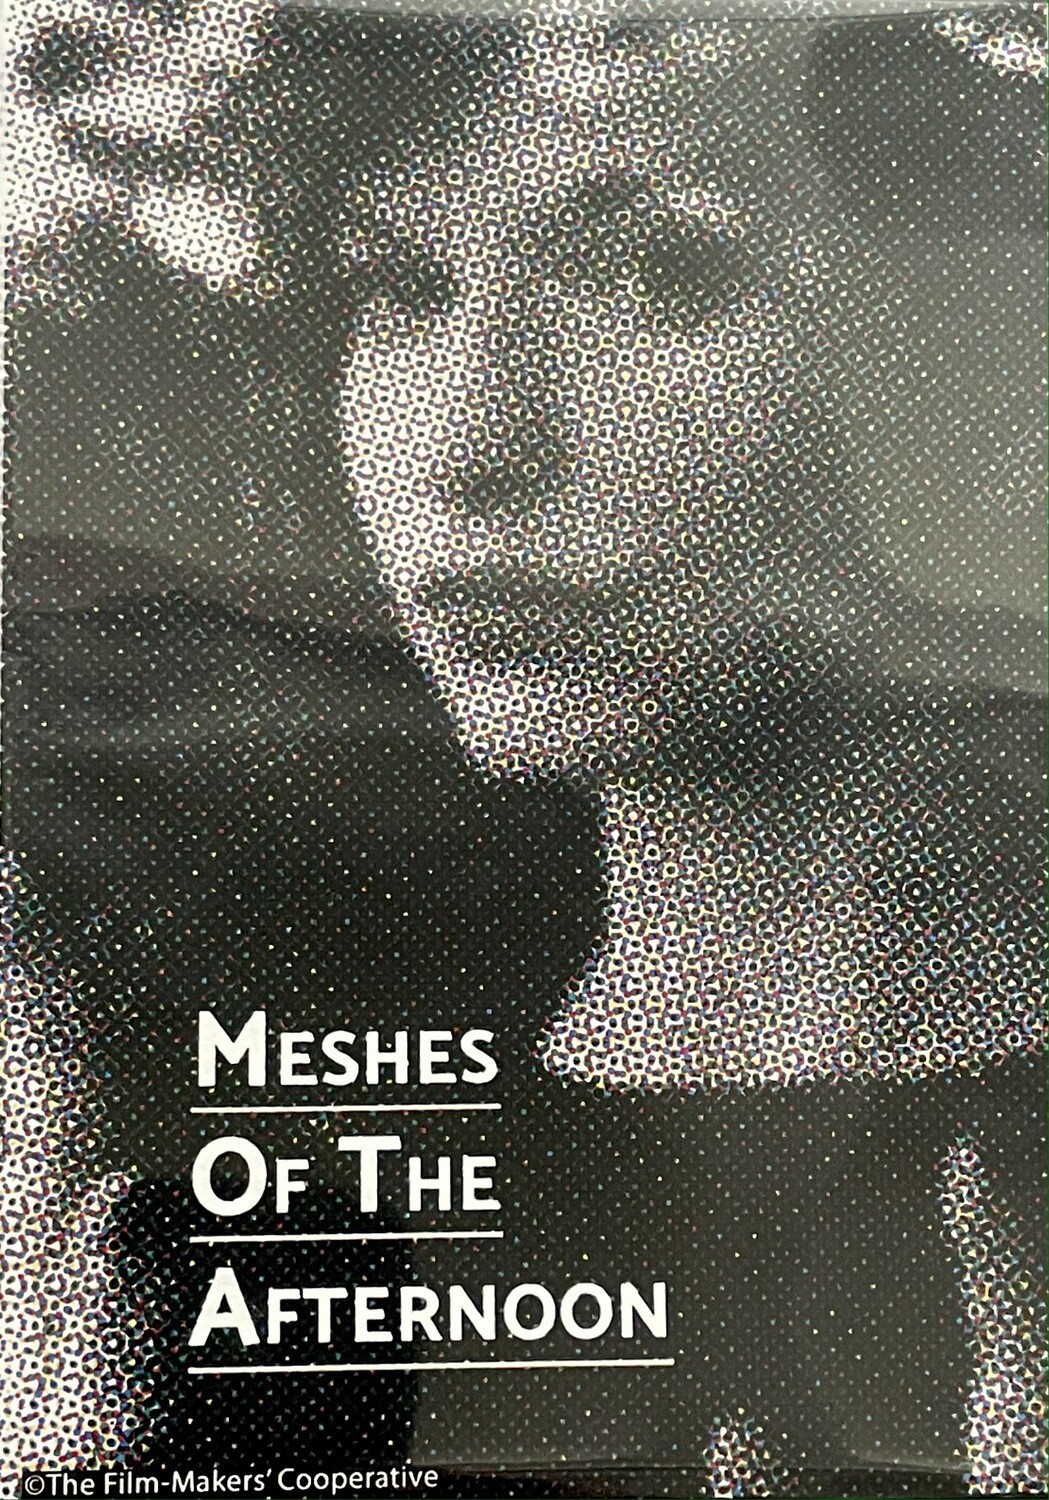 Meshes of the Afternoon by Maya Deren DVD